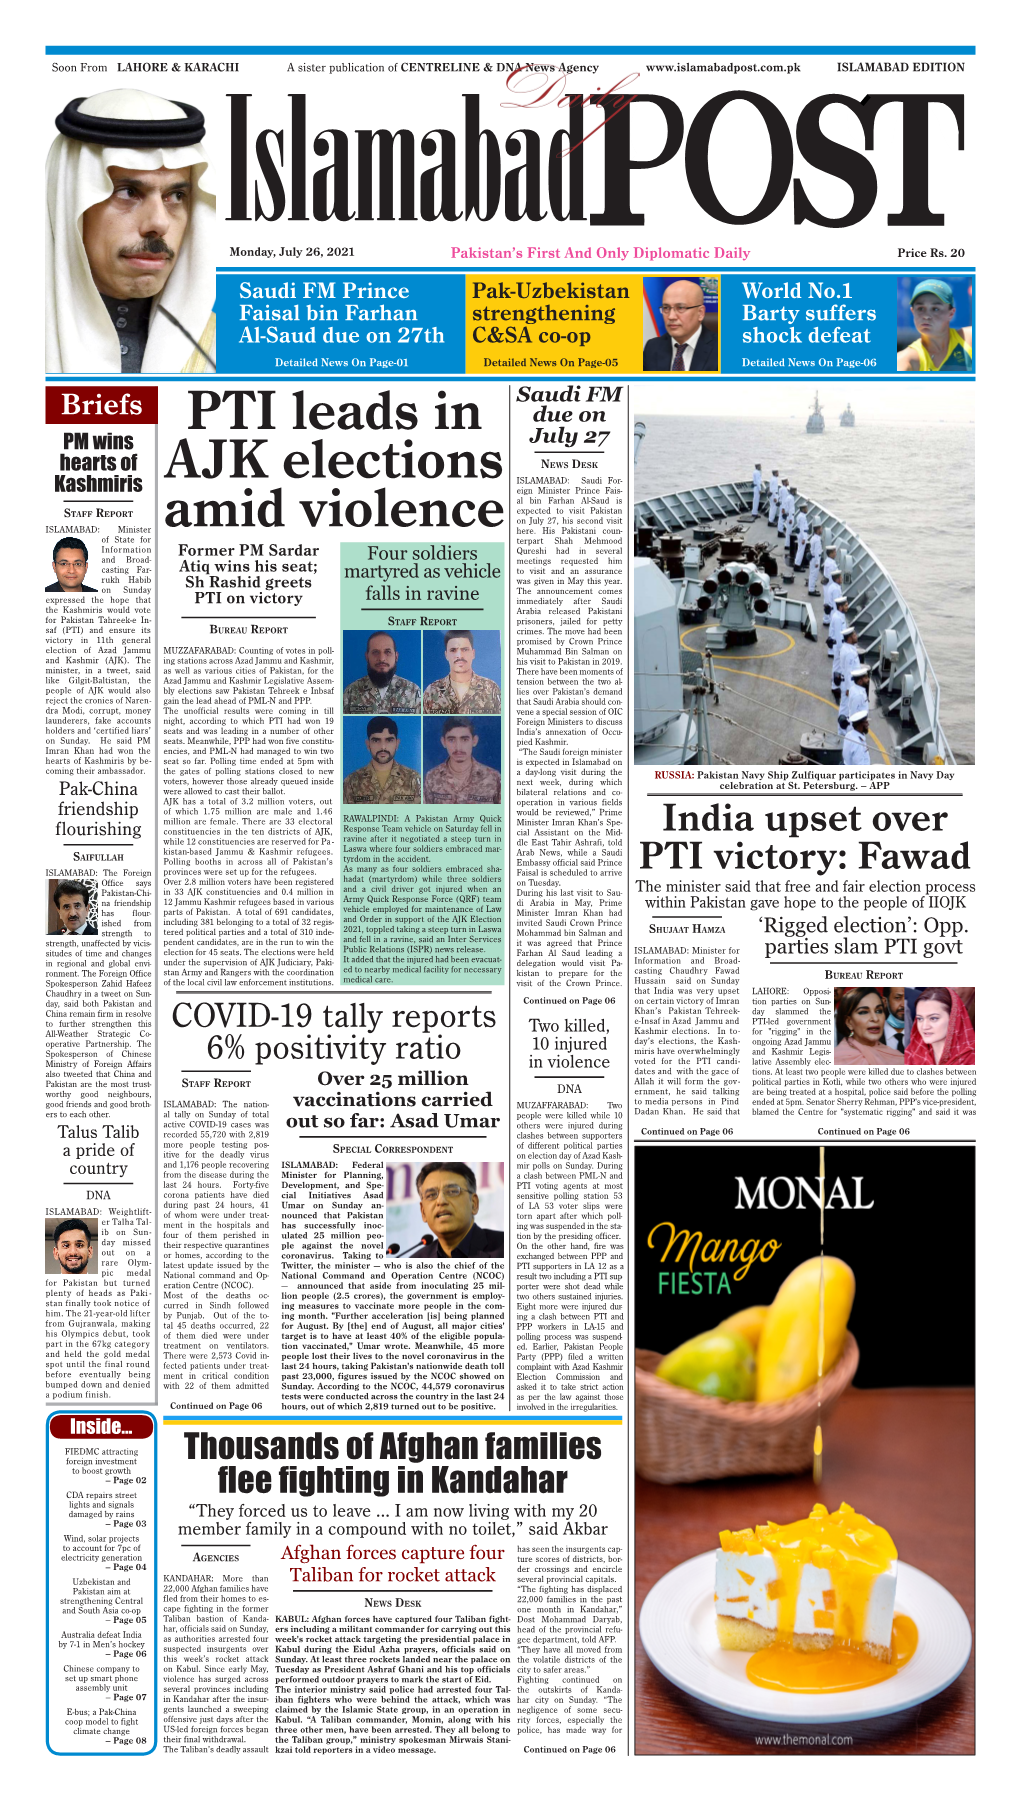 PTI Leads in AJK Elections Amid Violence